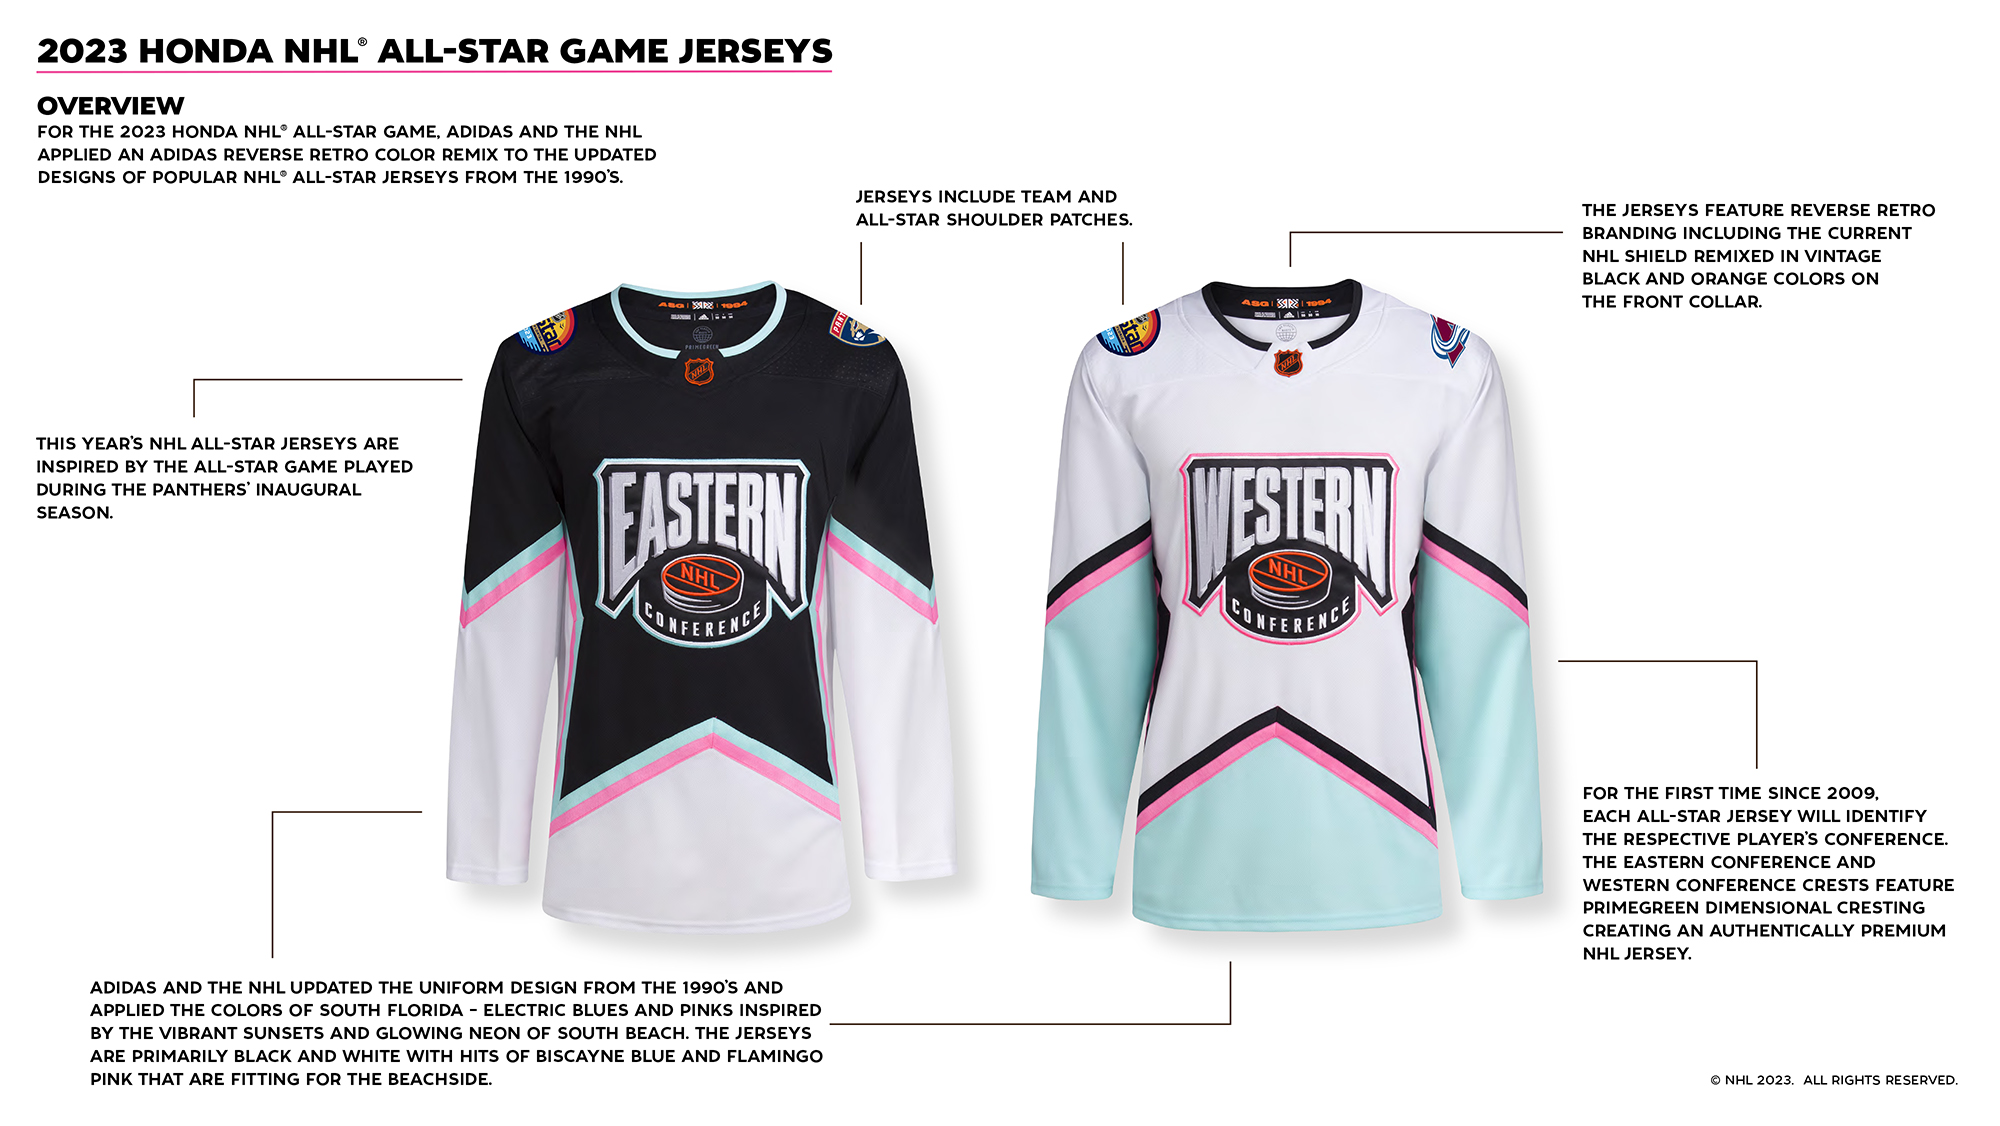 Your 2023 AllStar Game Sweater